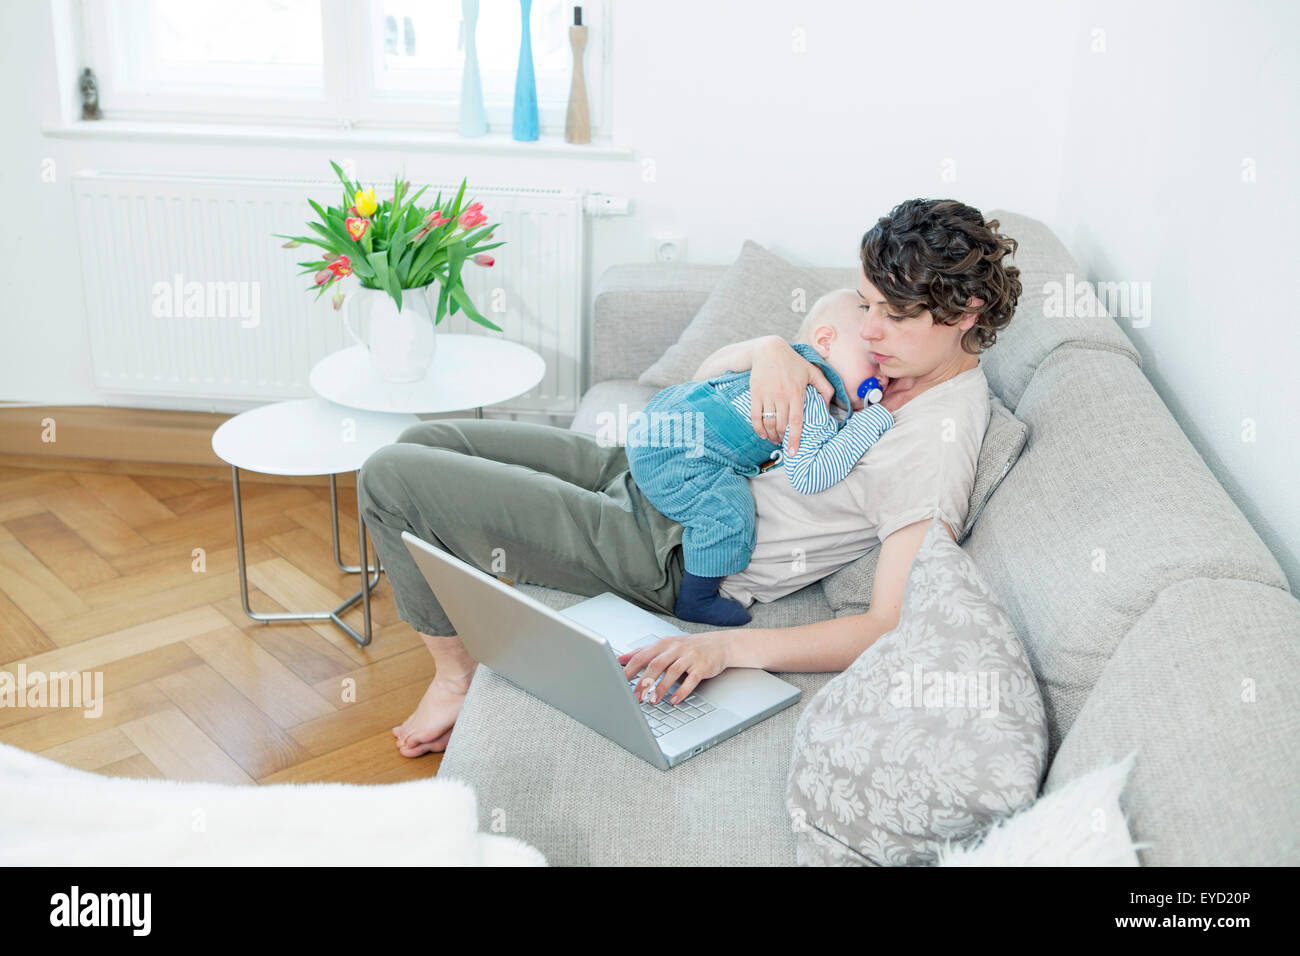 Mother working on laptop with baby in her lap Stock Photo